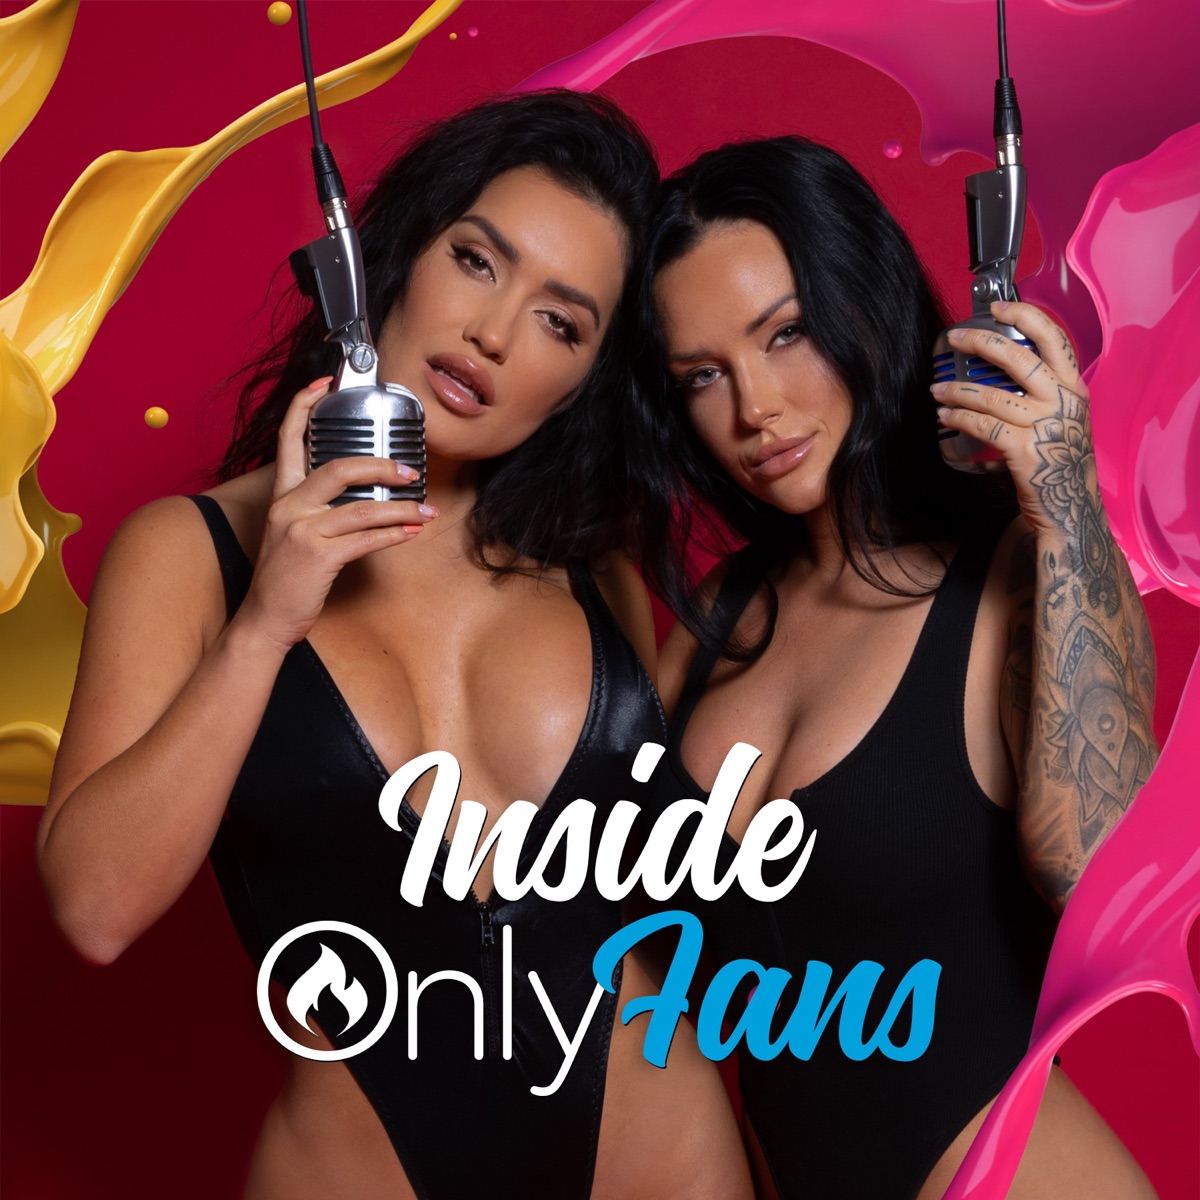 009 - Gynecologist Nightmares and Farm Living w Katy Jo Raelyn – Inside  OnlyFans – Podcast – Podtail